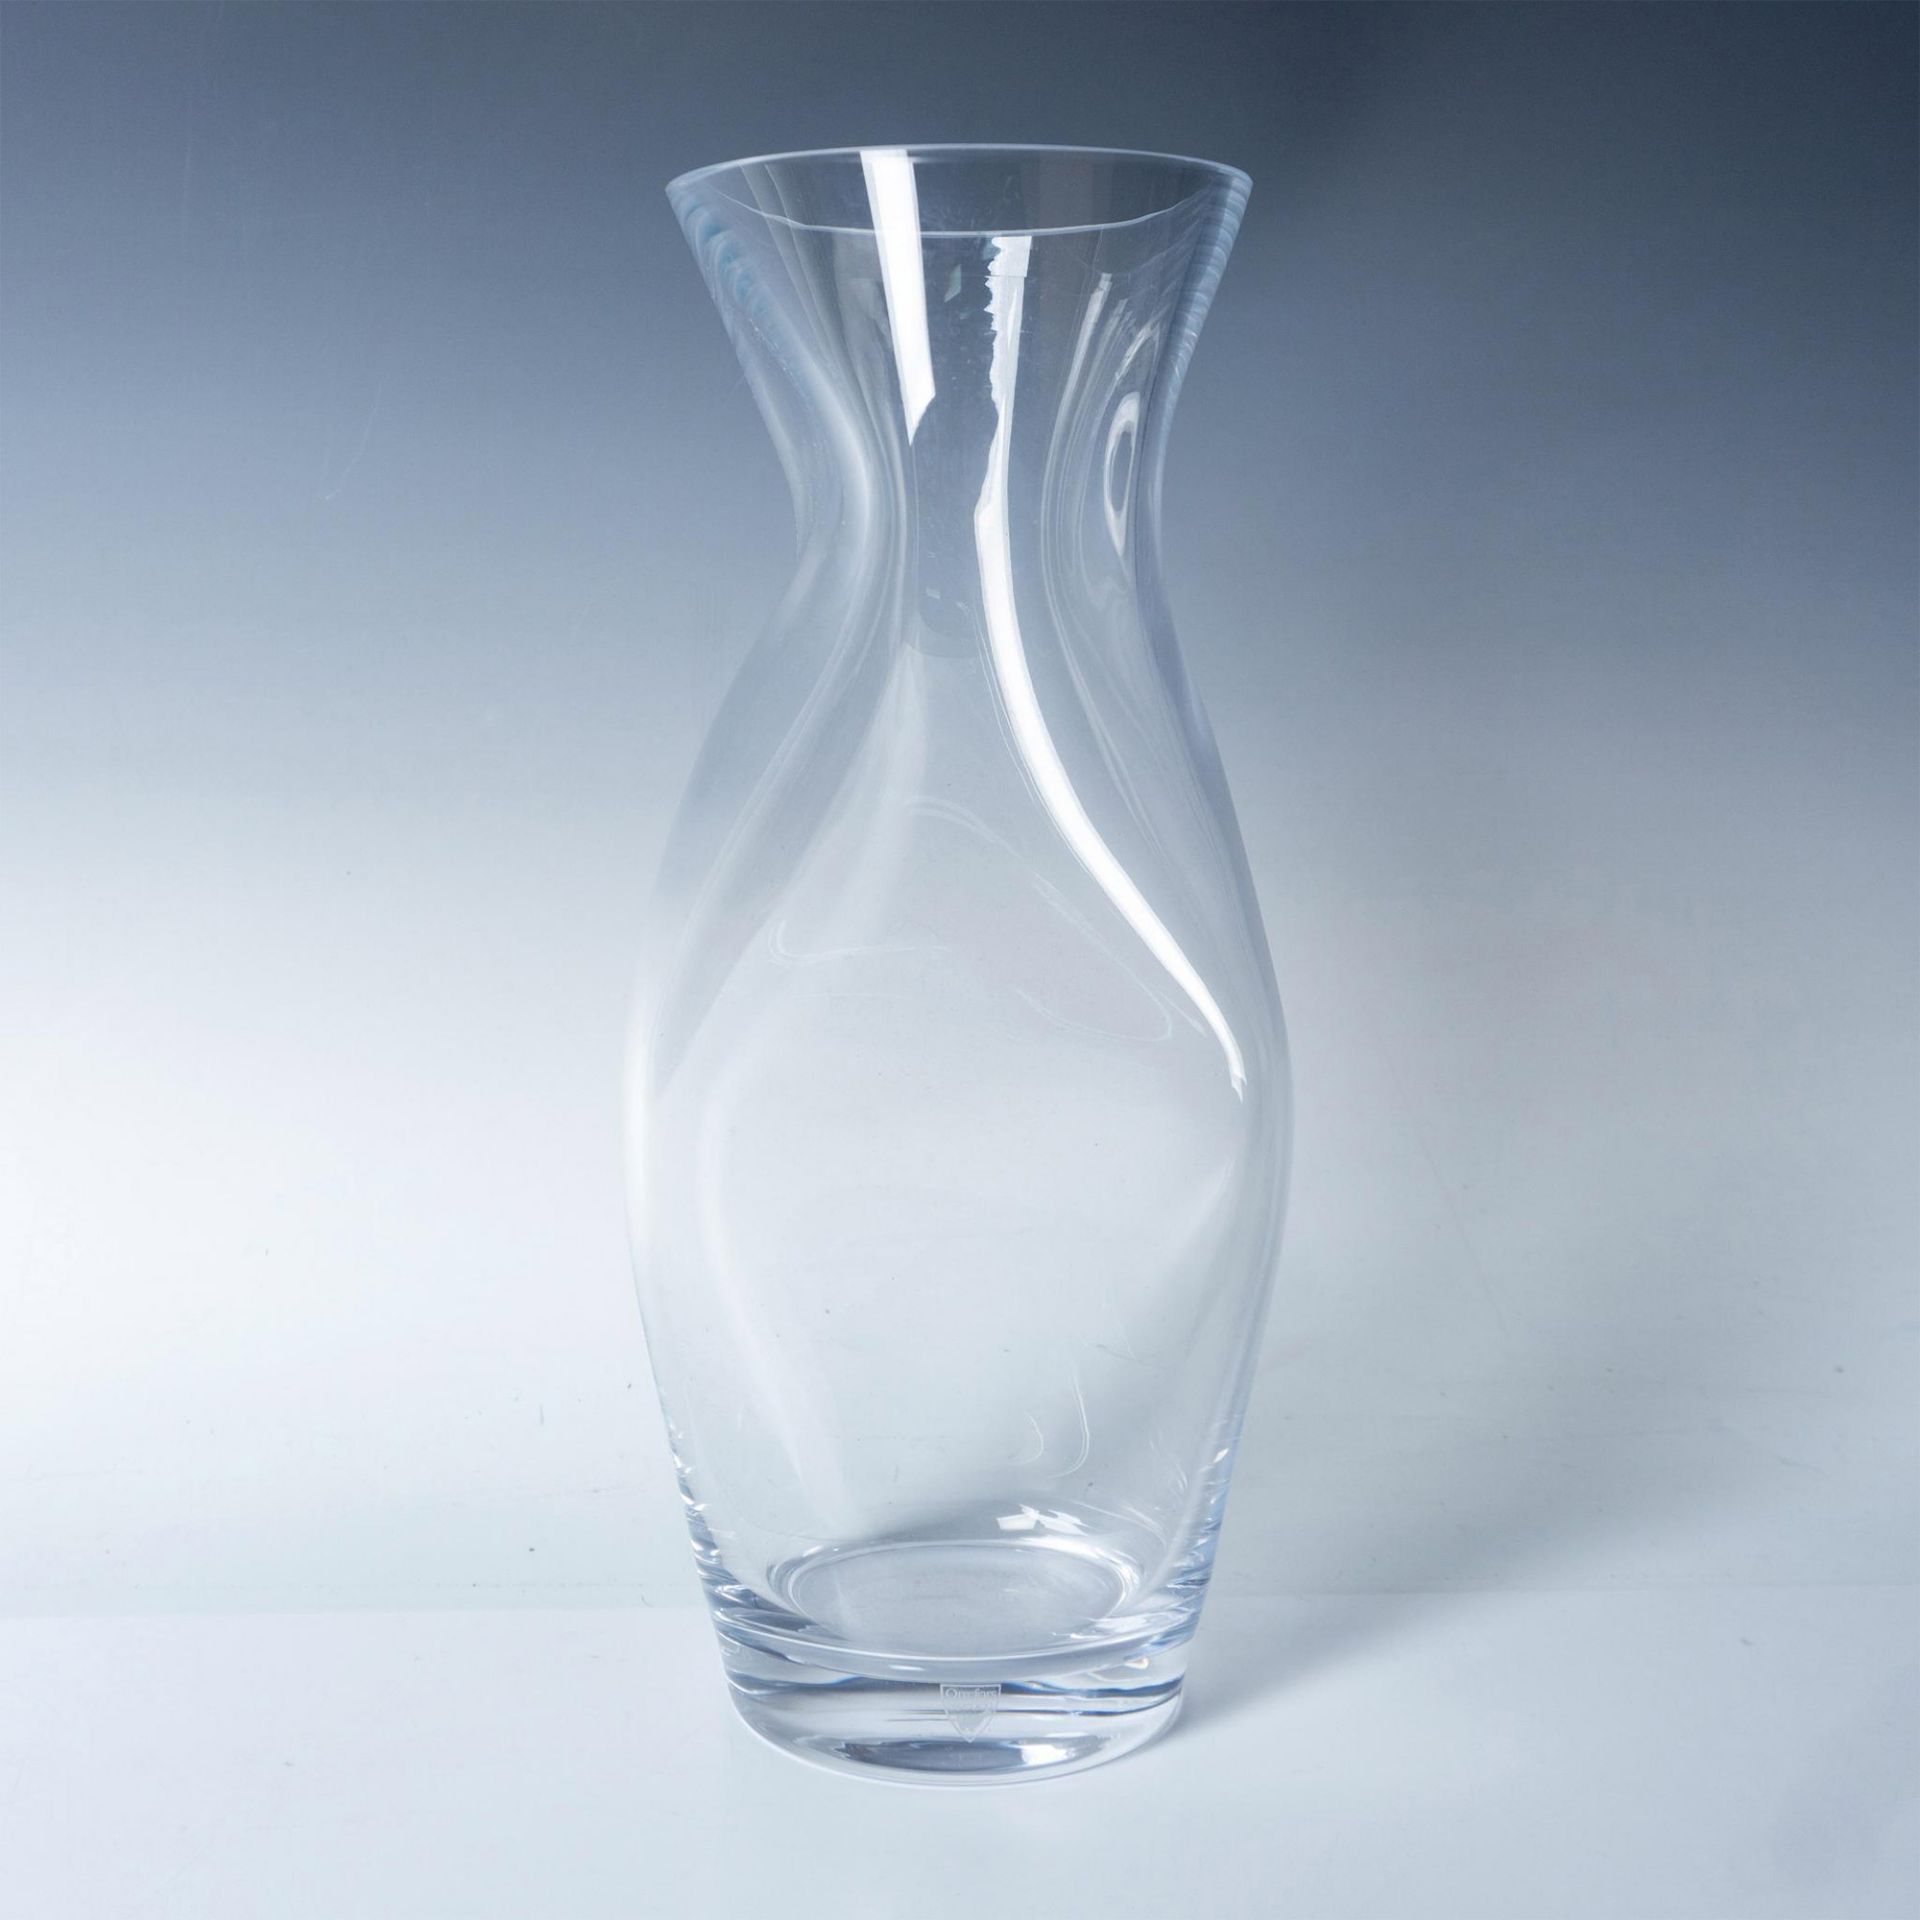 Orrefors Clear Crystal Vase, Squeeze Pattern - Image 2 of 5